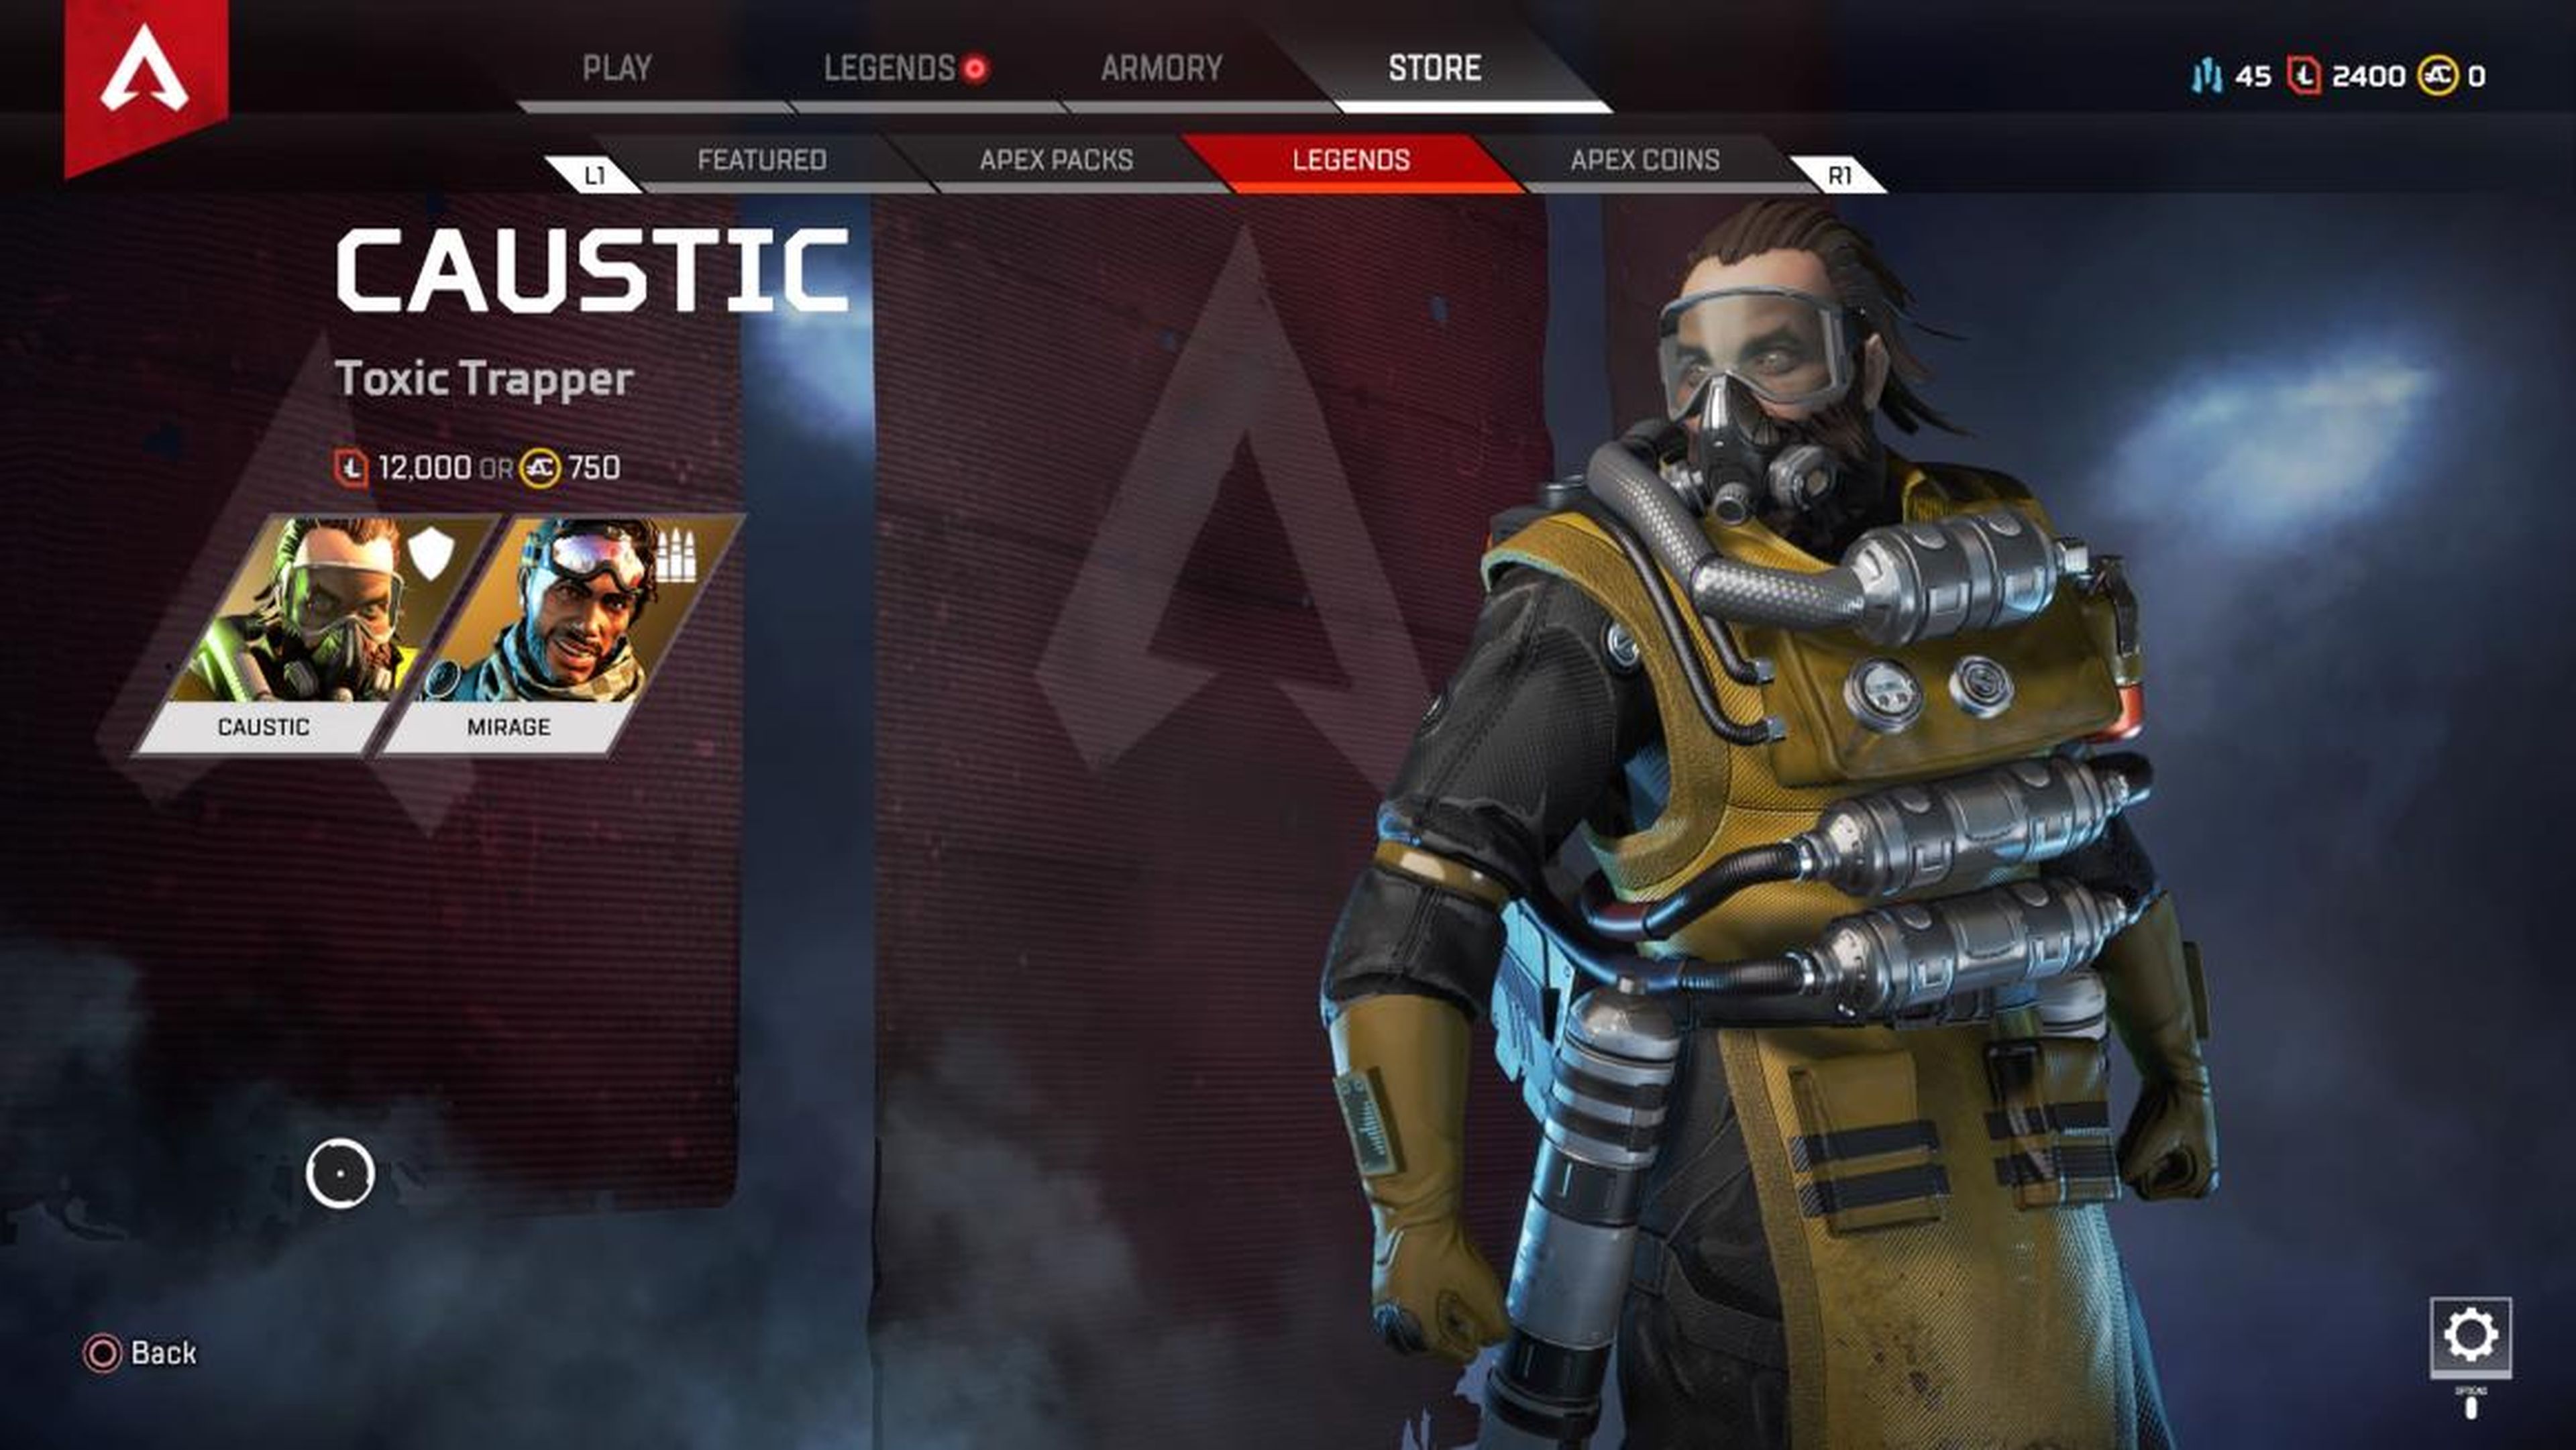 Caustic and Mirage were the first two unlockable characters in "Apex Legends." Both could be purchased with Apex Coins or with earned in-game currency.